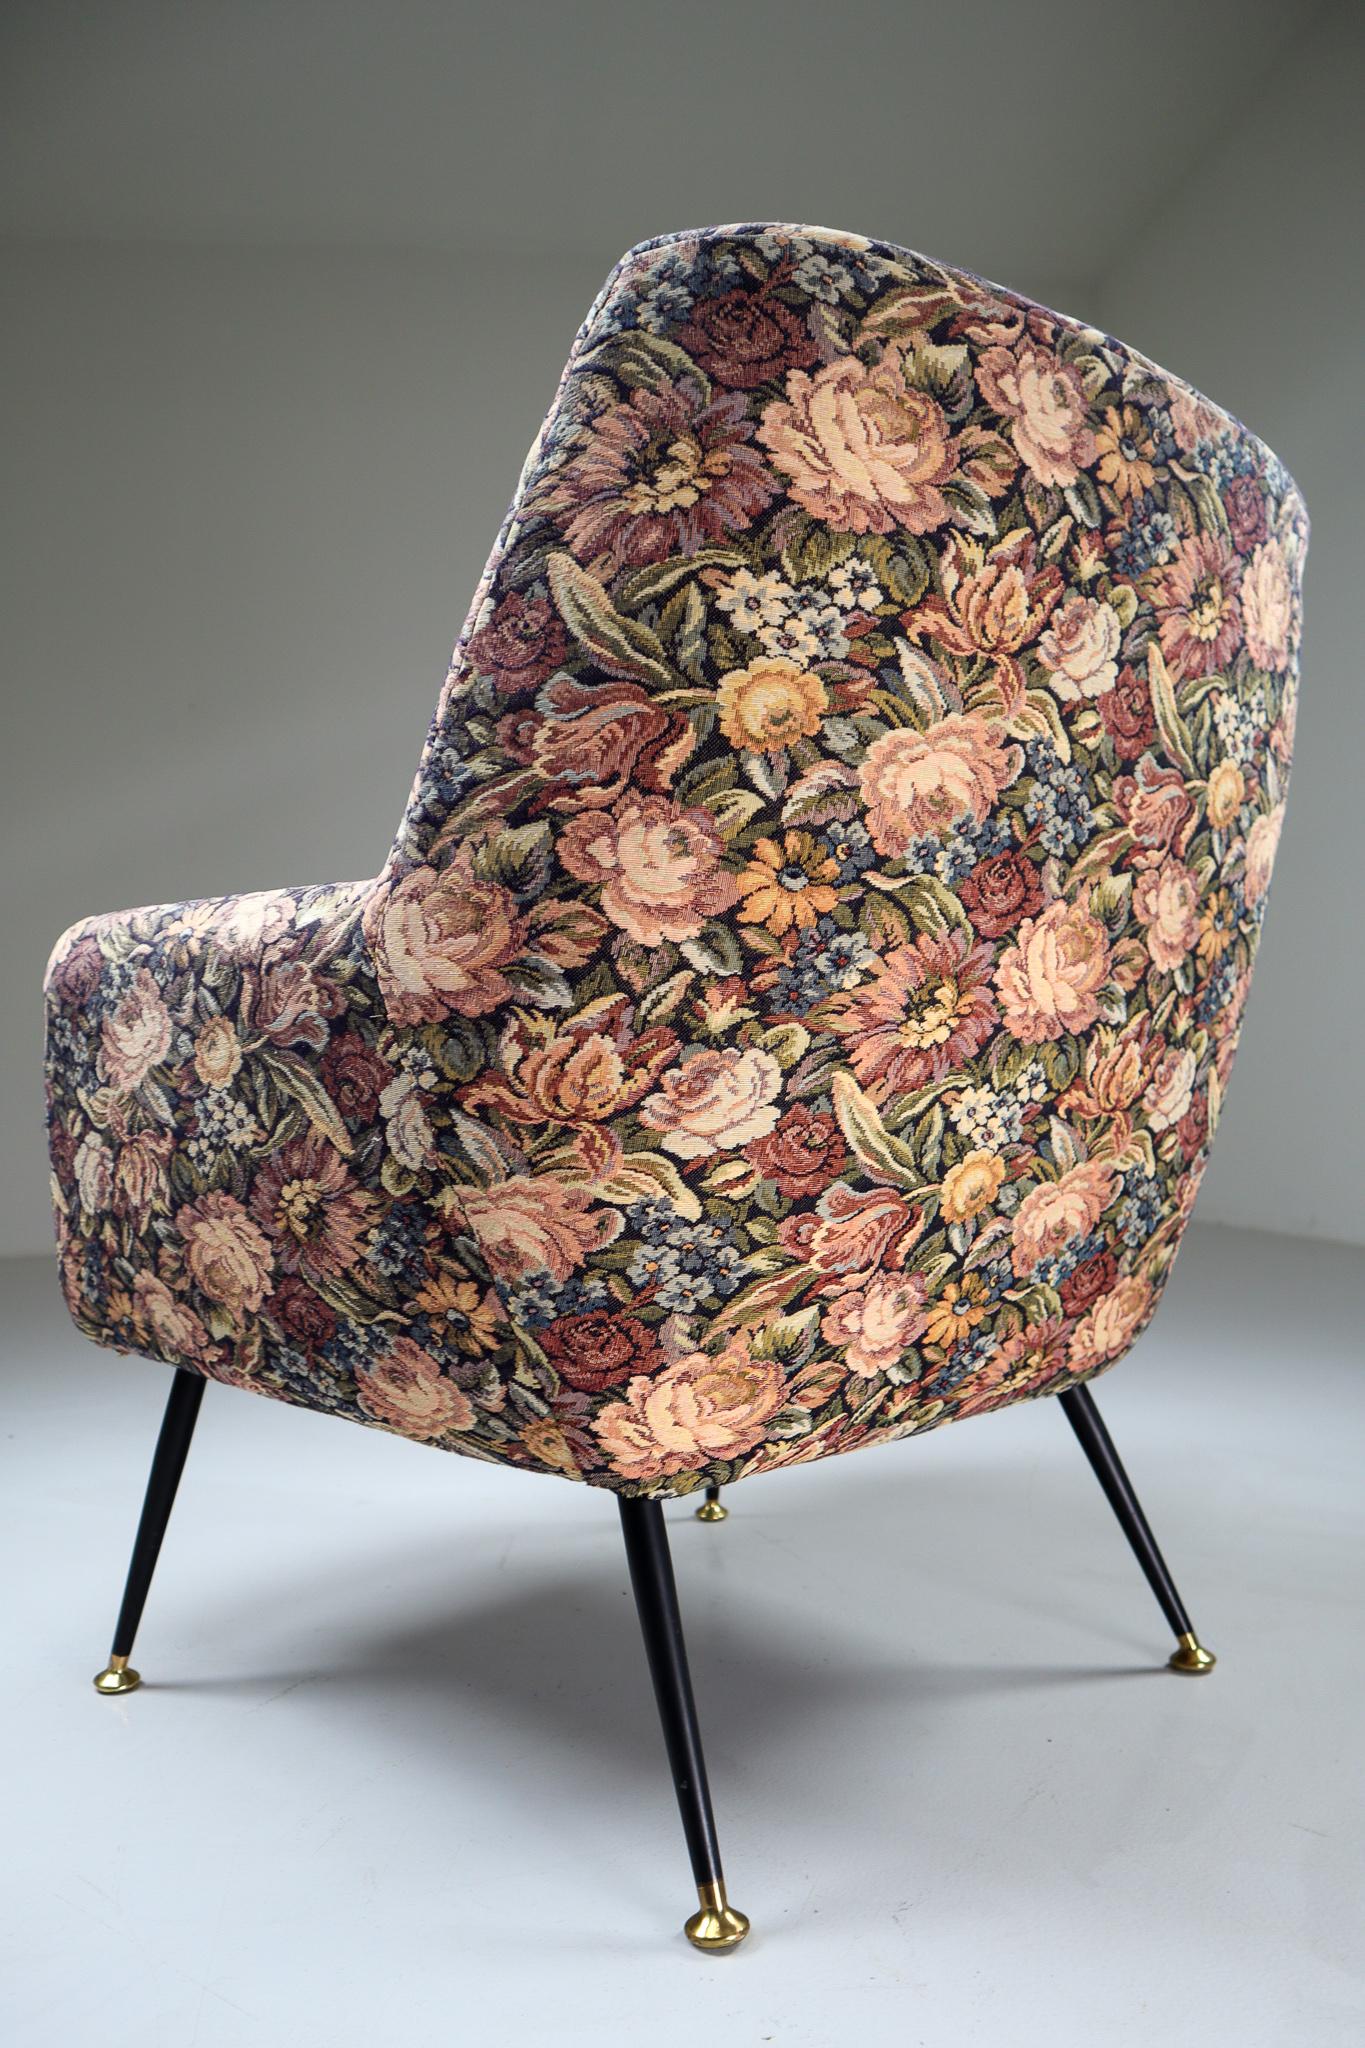 Italian armchair in original flower upholstery wool fabric, 1950s

Beautiful and elegant armchair all completely covered in original fabric. A high quality wool with colored flowers used to cover the seat and the backrest. The elegant legs are